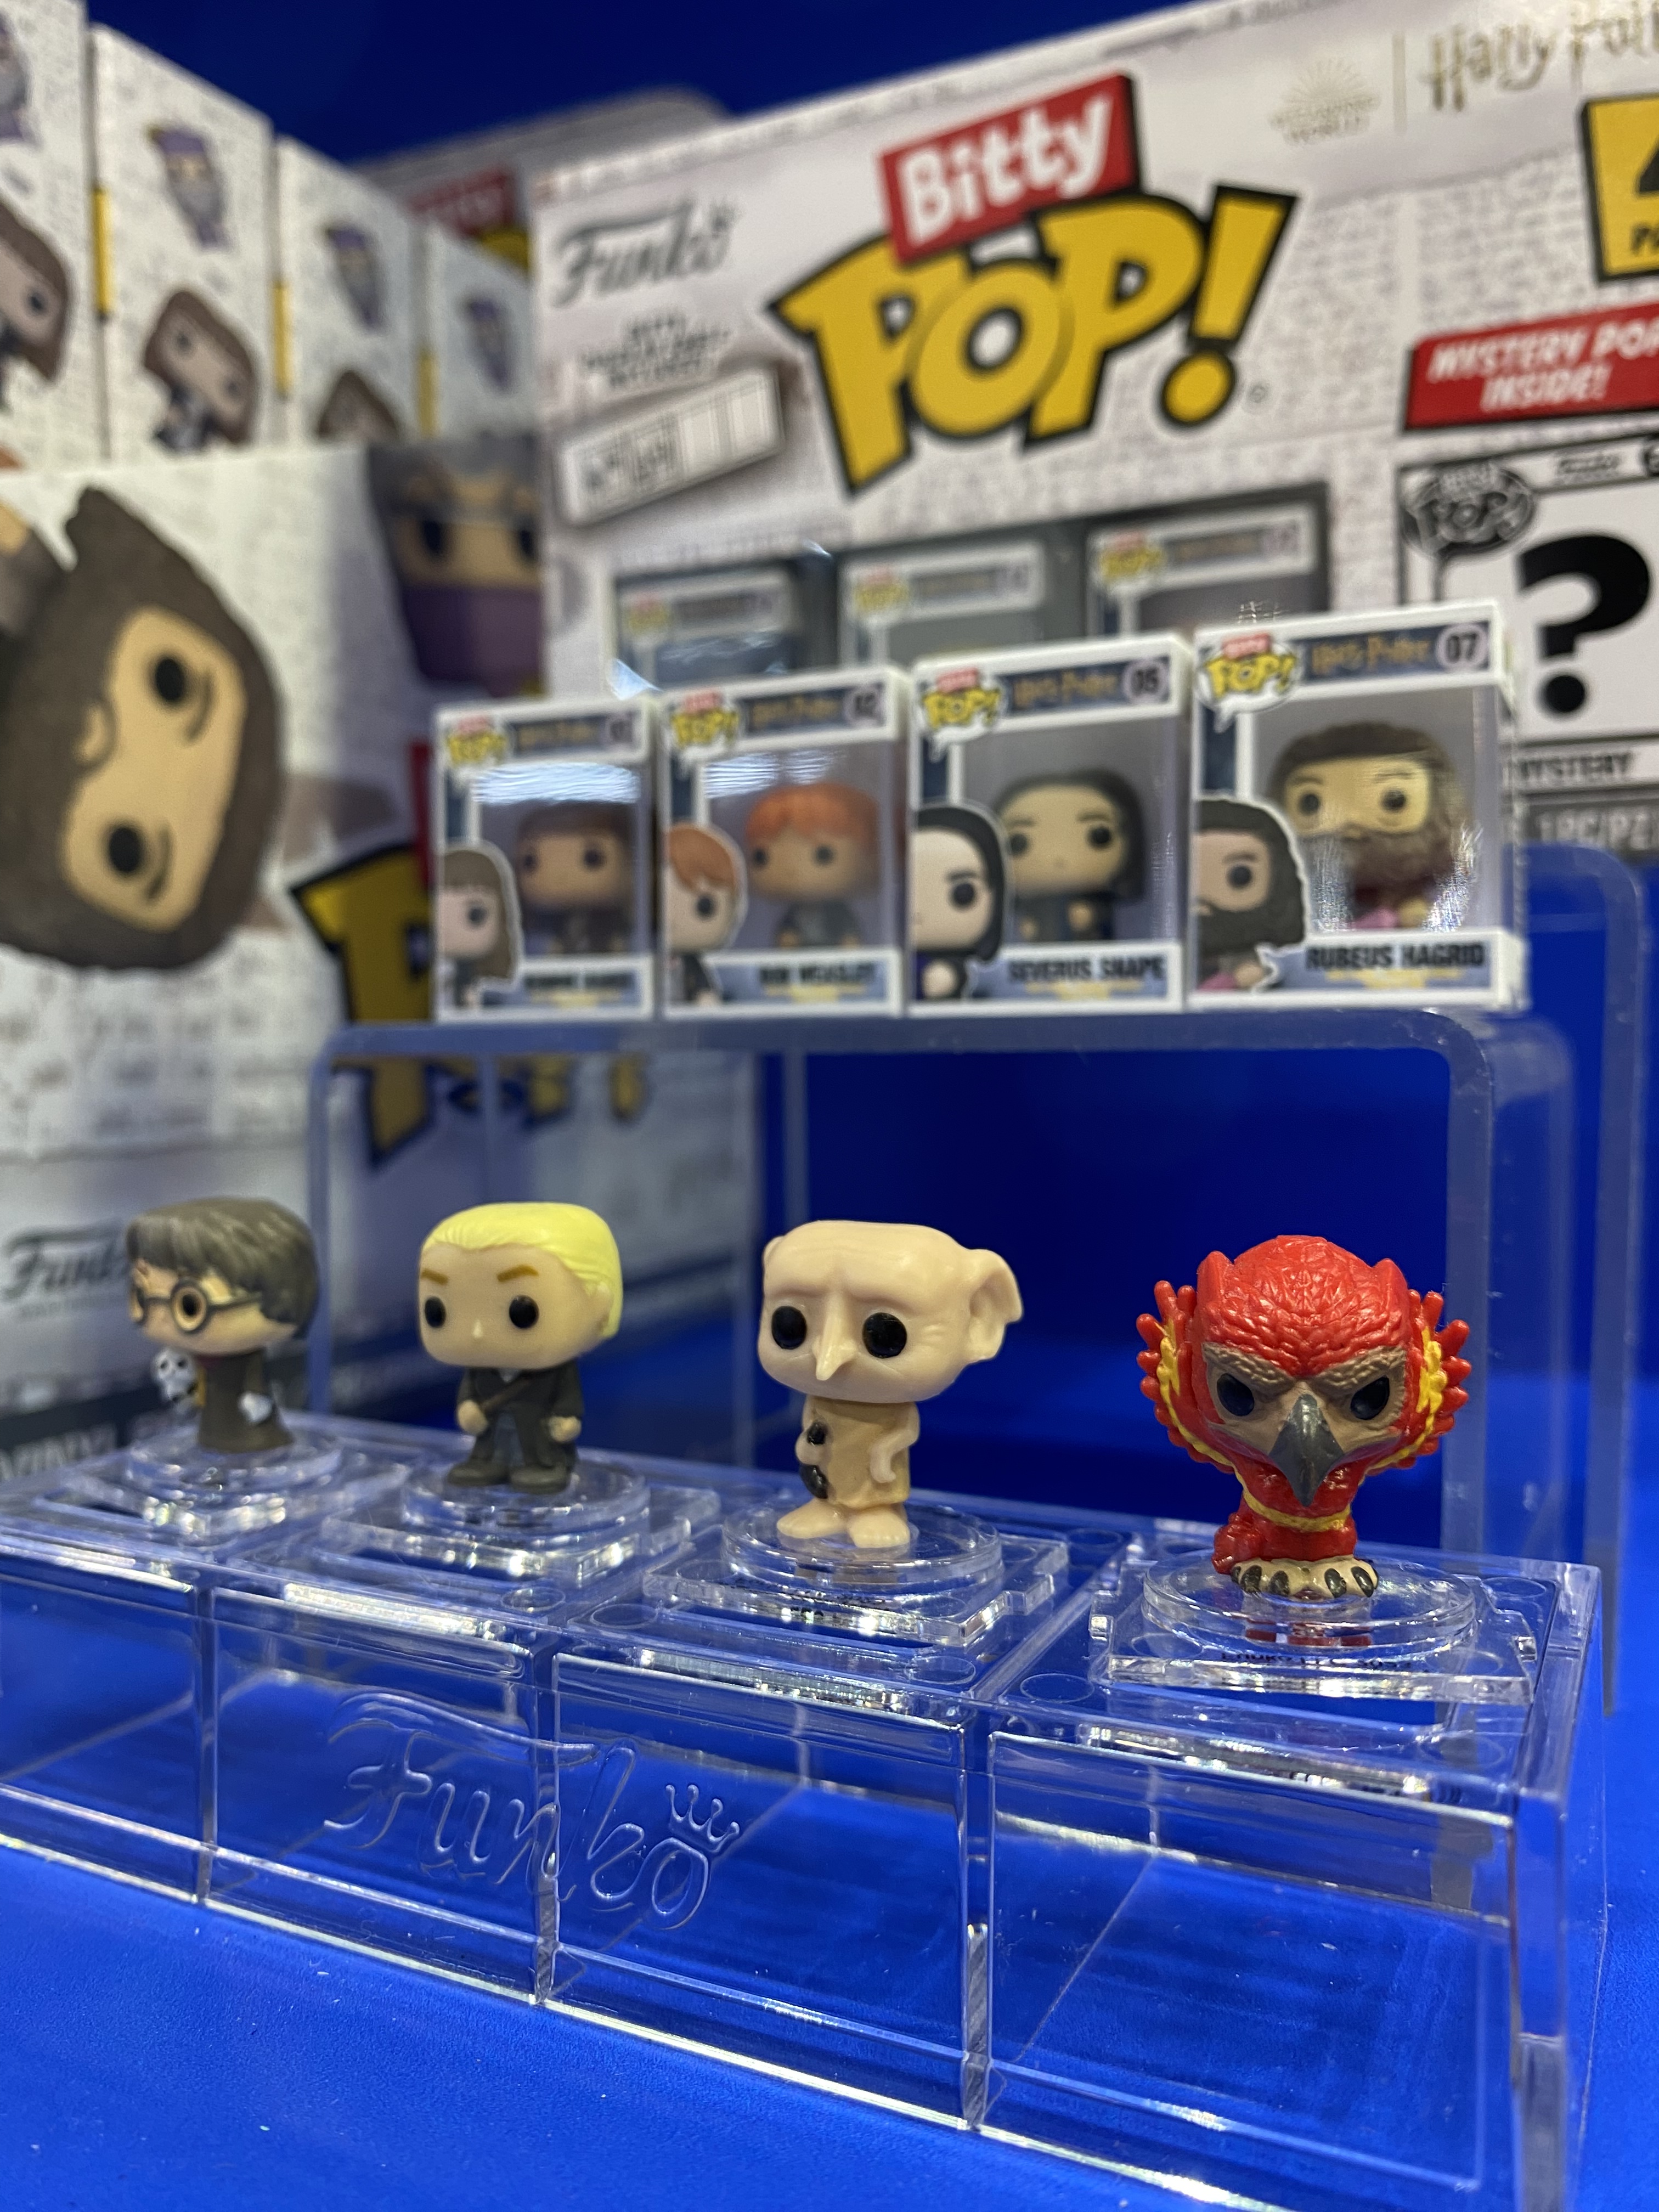 Funko to Publicly Debut All-New Bitty Pop! Line at London Toy Fair